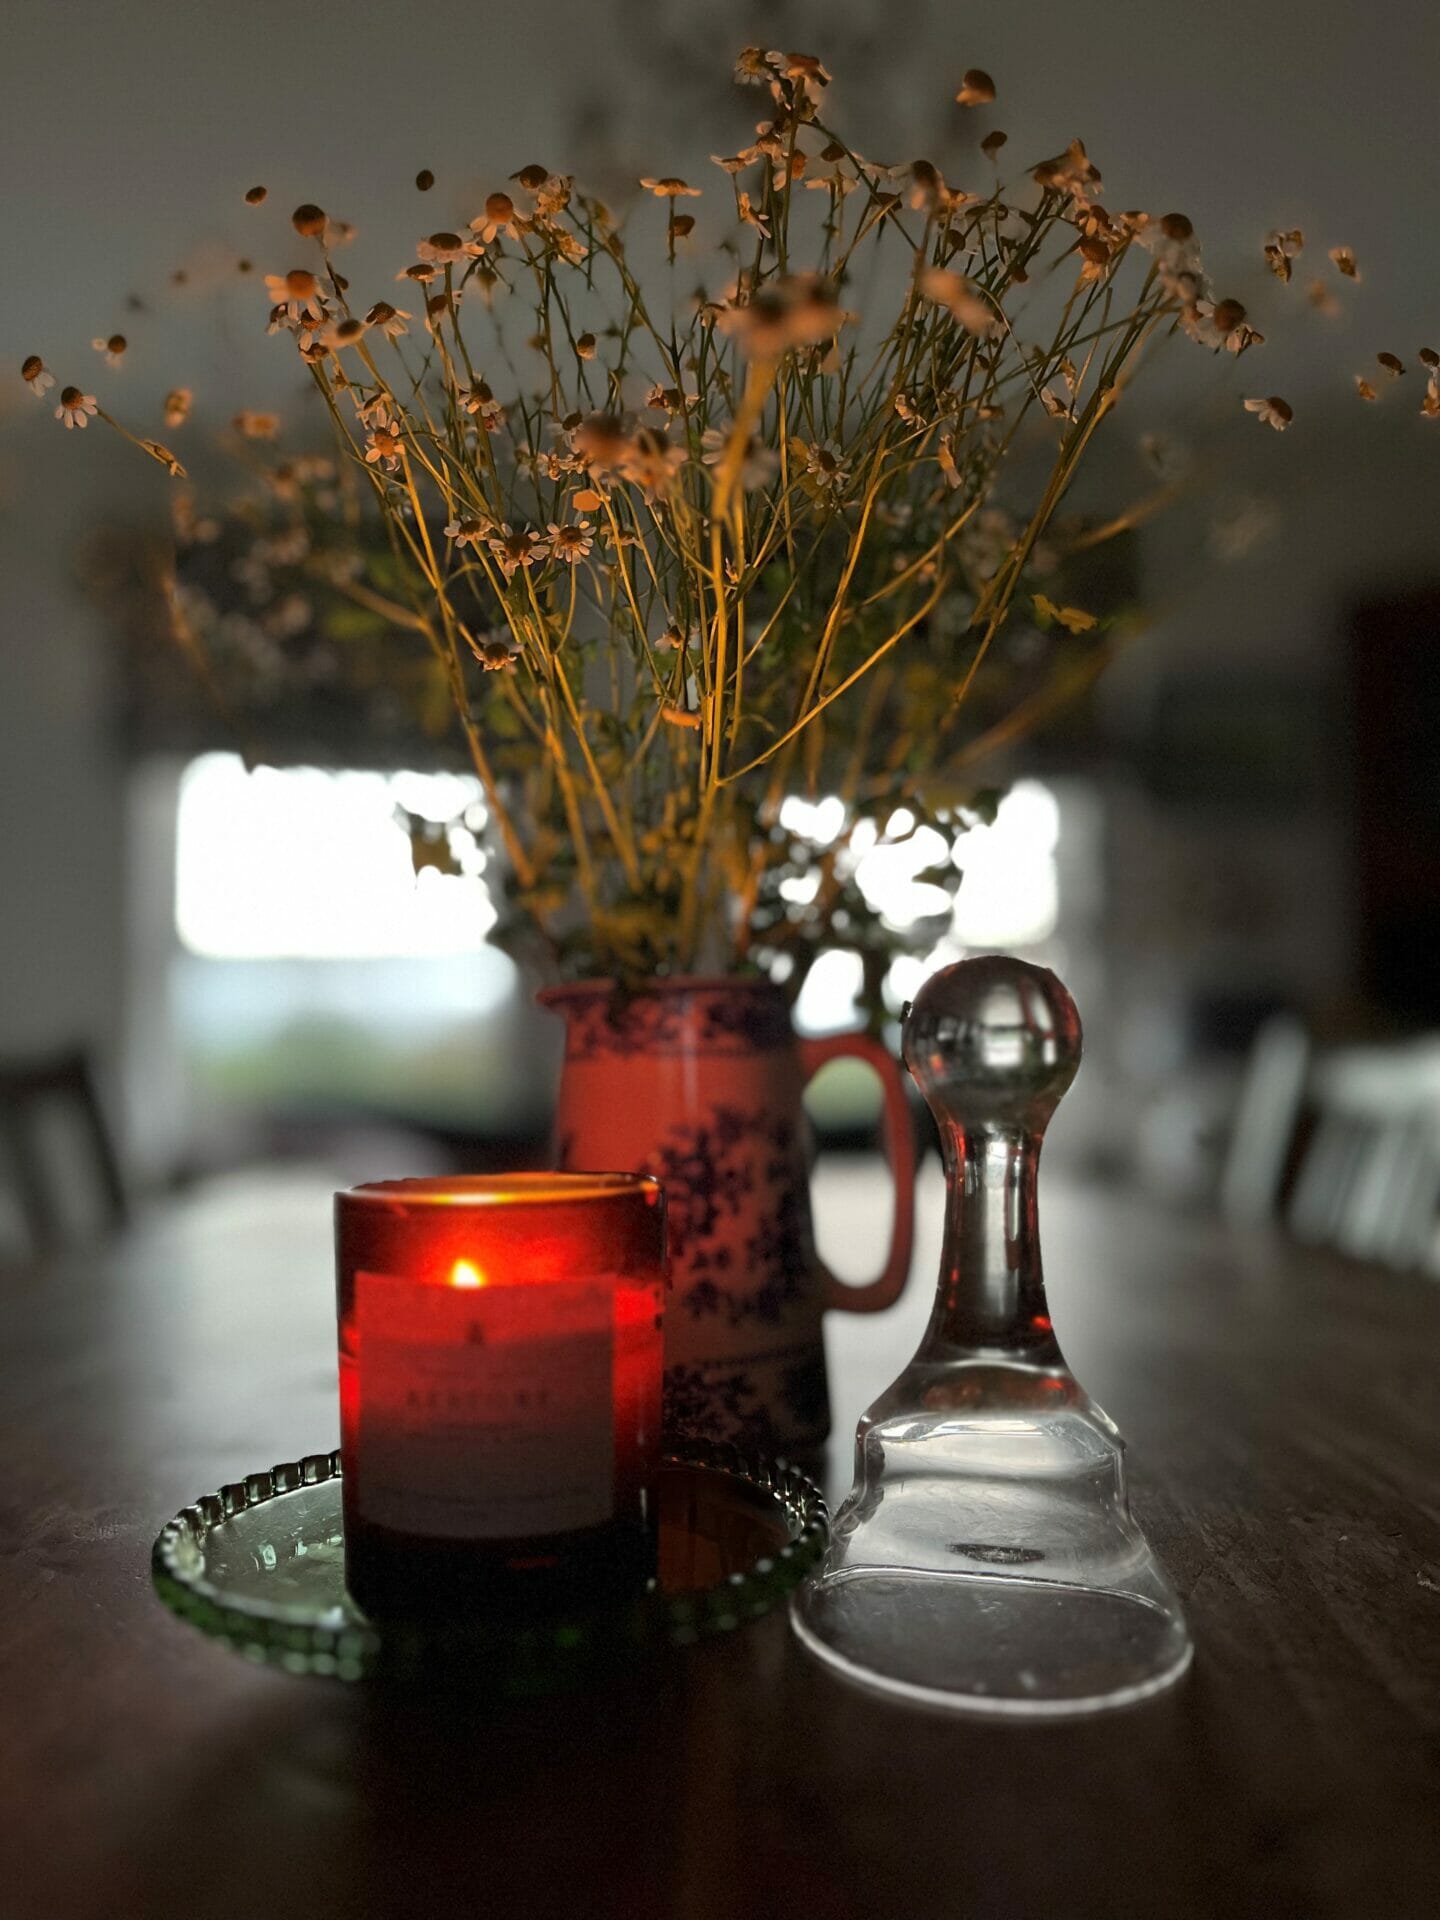 Photograph of lit candle in amber glass beside flowers and candle snuffer